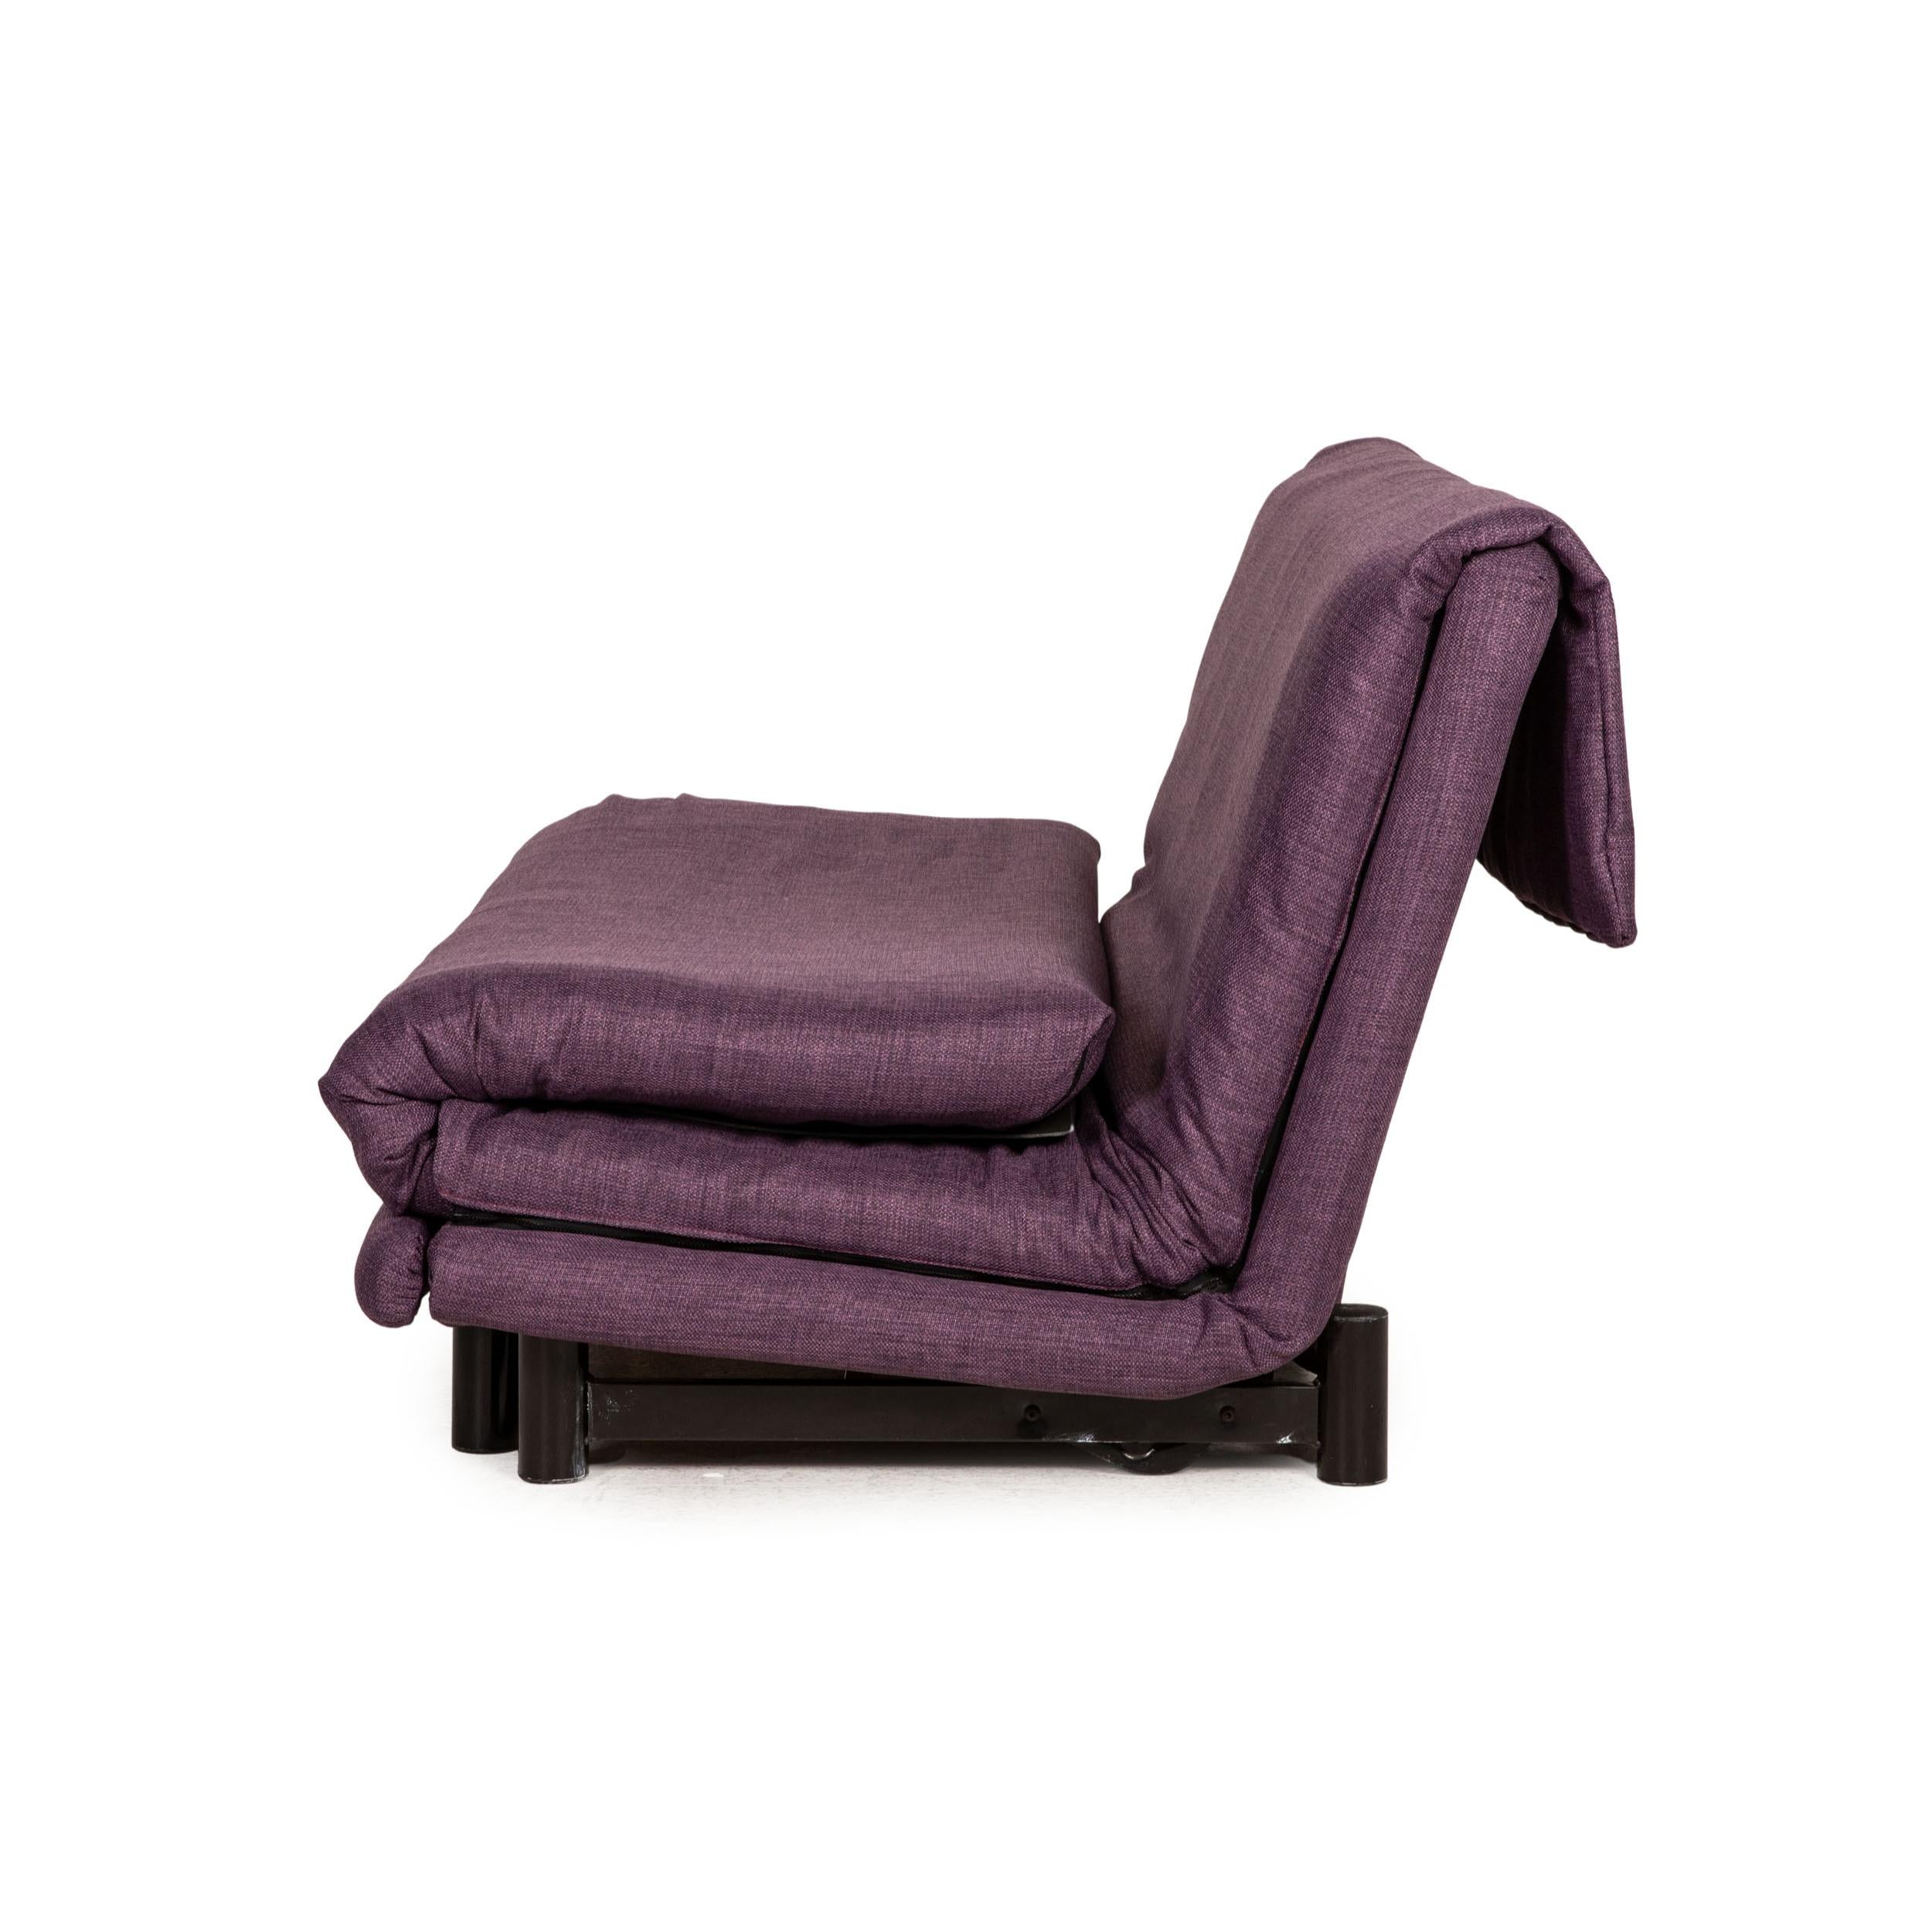 Ligne Roset Multy Fabric Sofa Purple Three-Seater Couch Function Sleeping For Sale 3